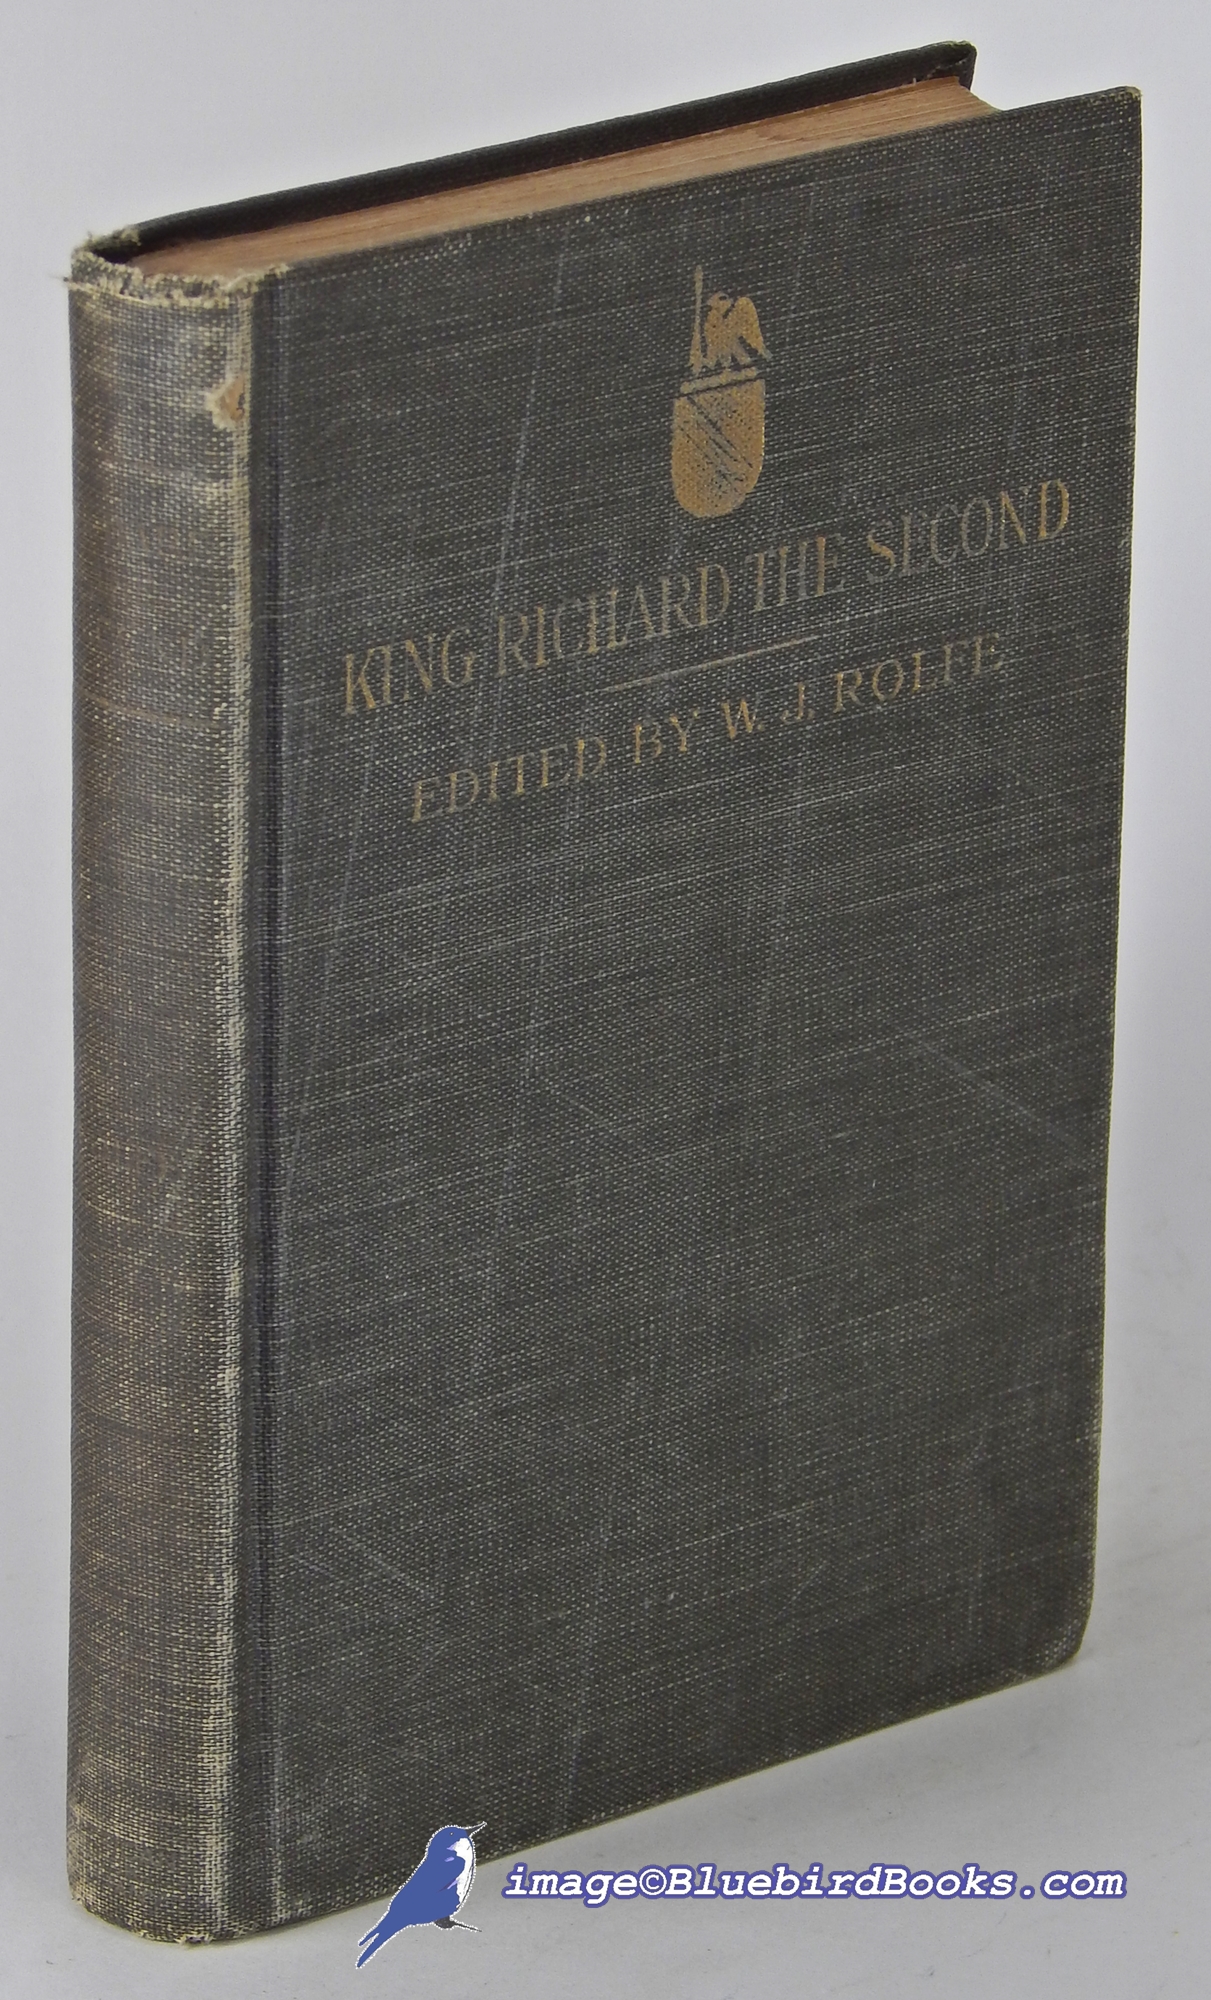 SHAKESPEARE, WILLIAM; ROLFE, WILLIAM J. (EDITOR) - Shakespeare's Tragedy of King Richard the Second